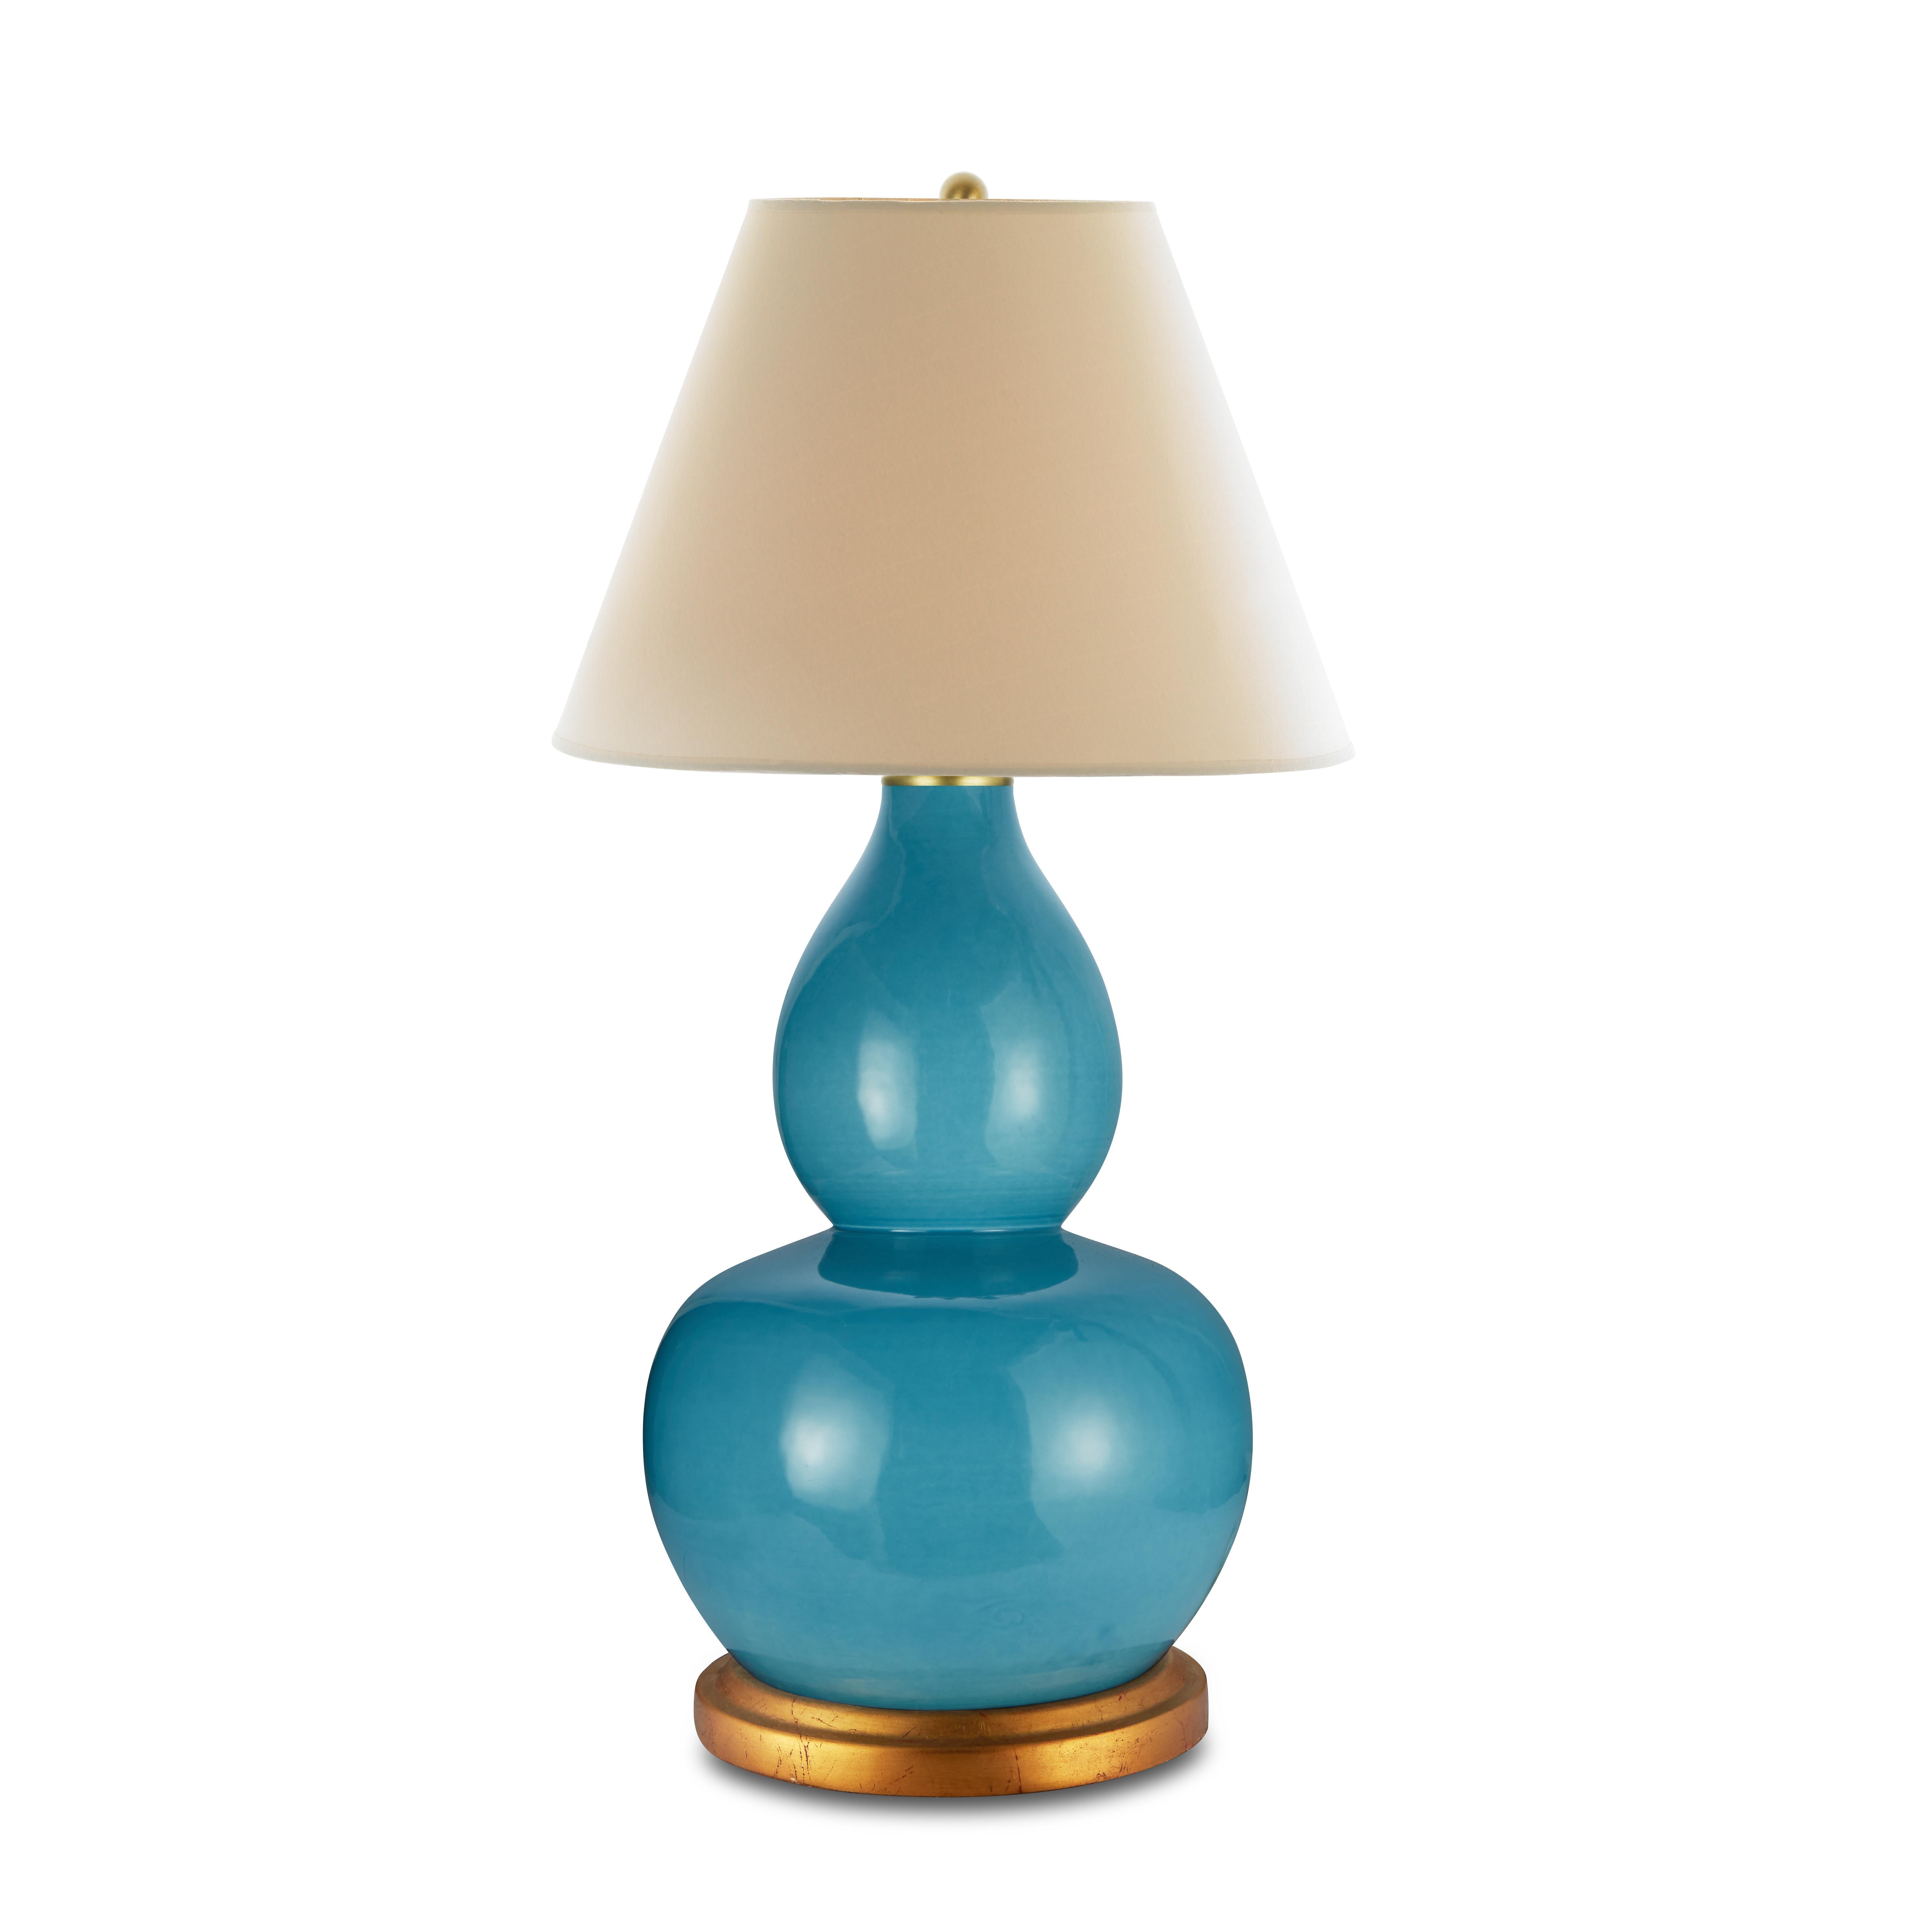 Gilt Bunny Williams Home Mineral Lamp For Sale